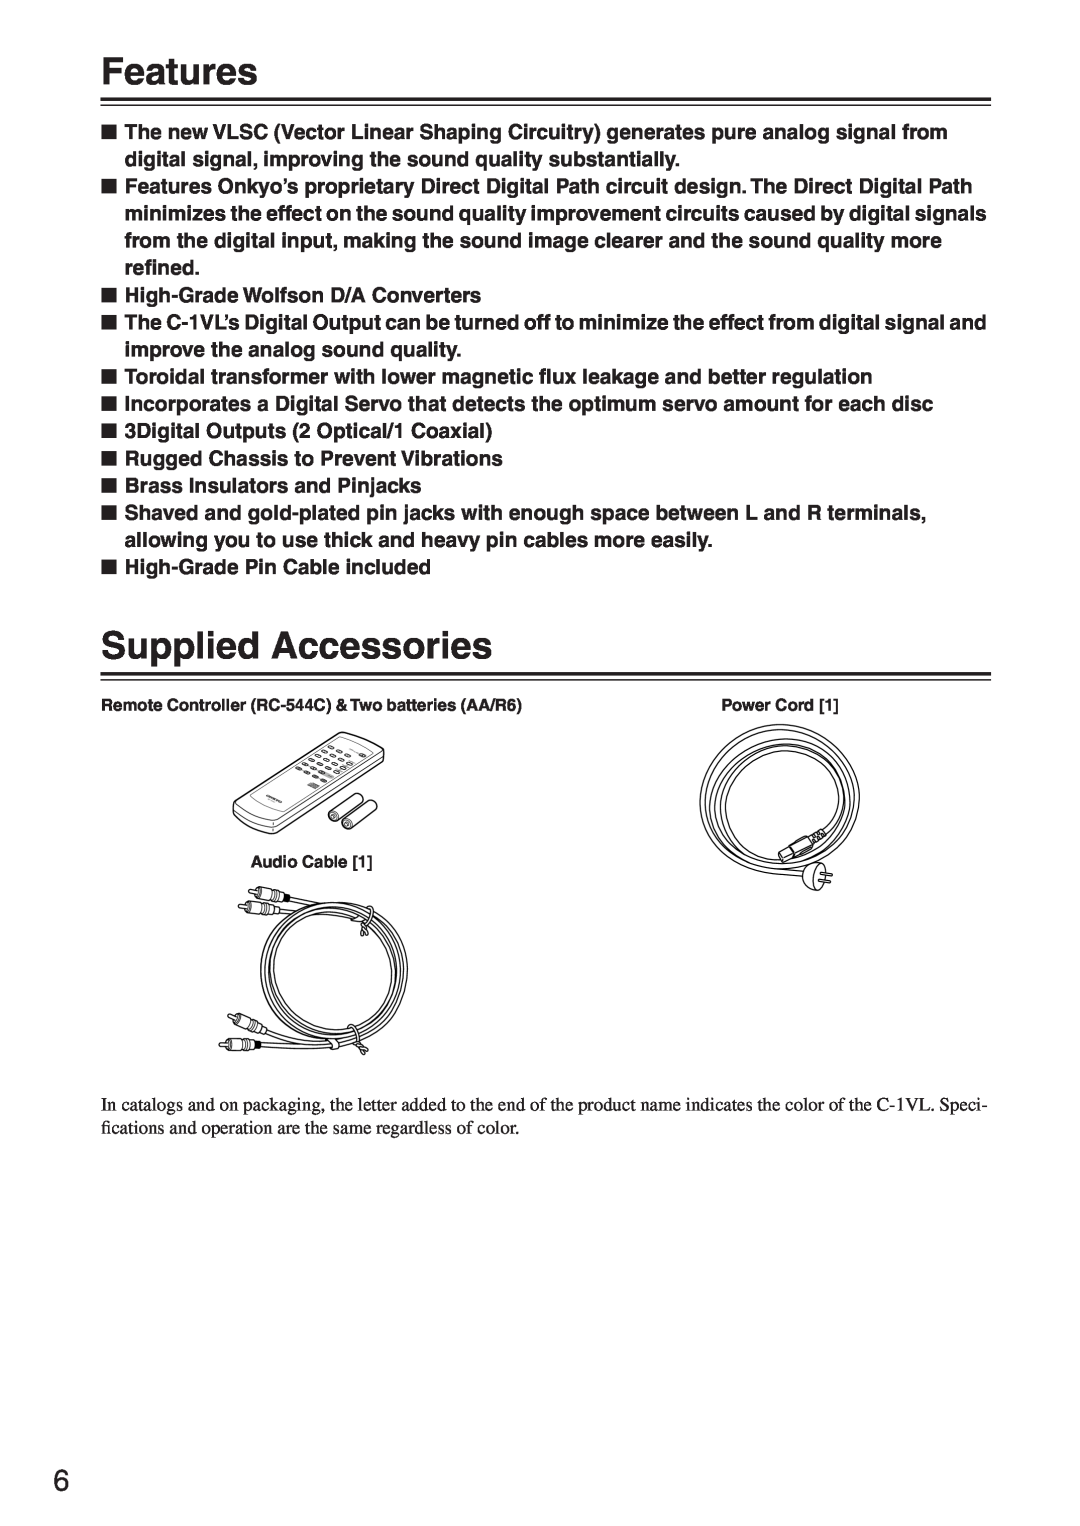 Onkyo C-1VL instruction manual Features, Supplied Accessories 